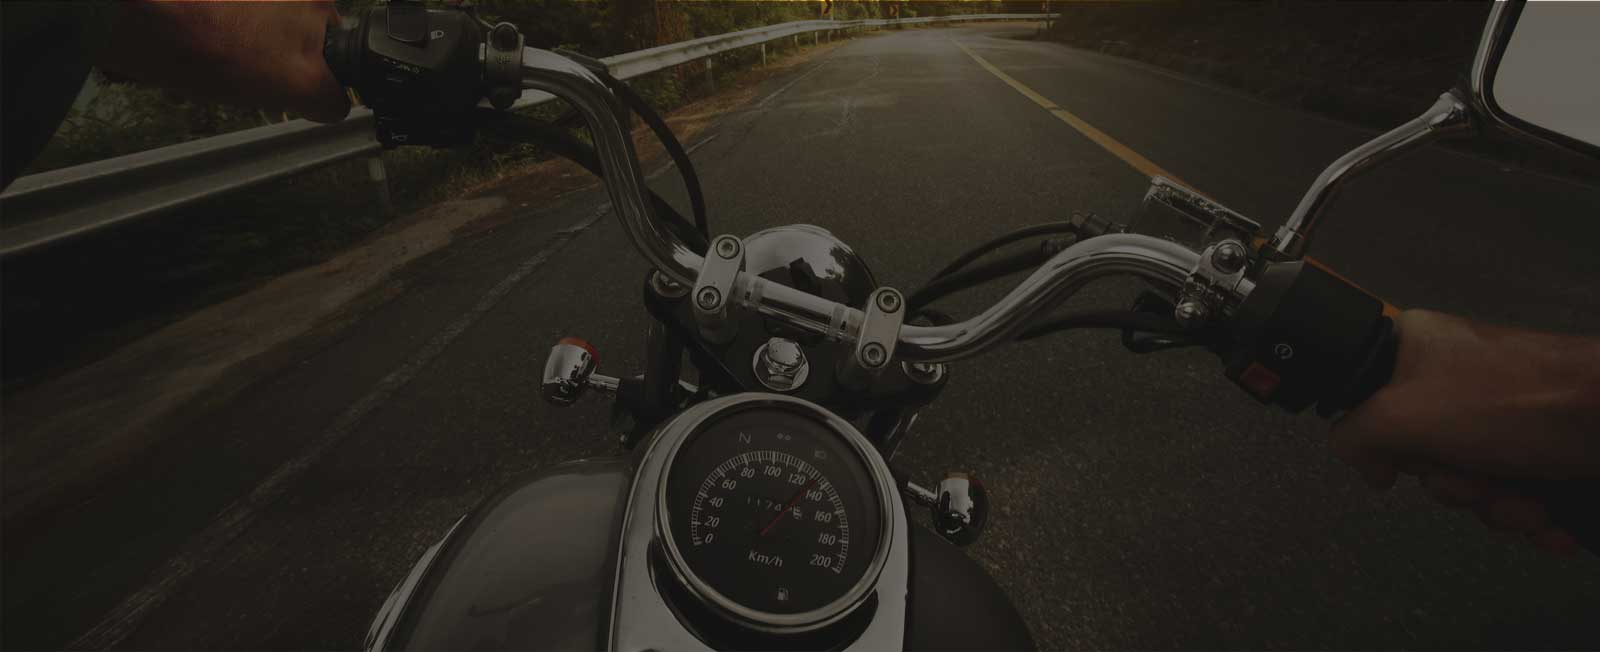 California Motorcycle Insurance with a Cheap Rates $6/month - MIS Insurance Services